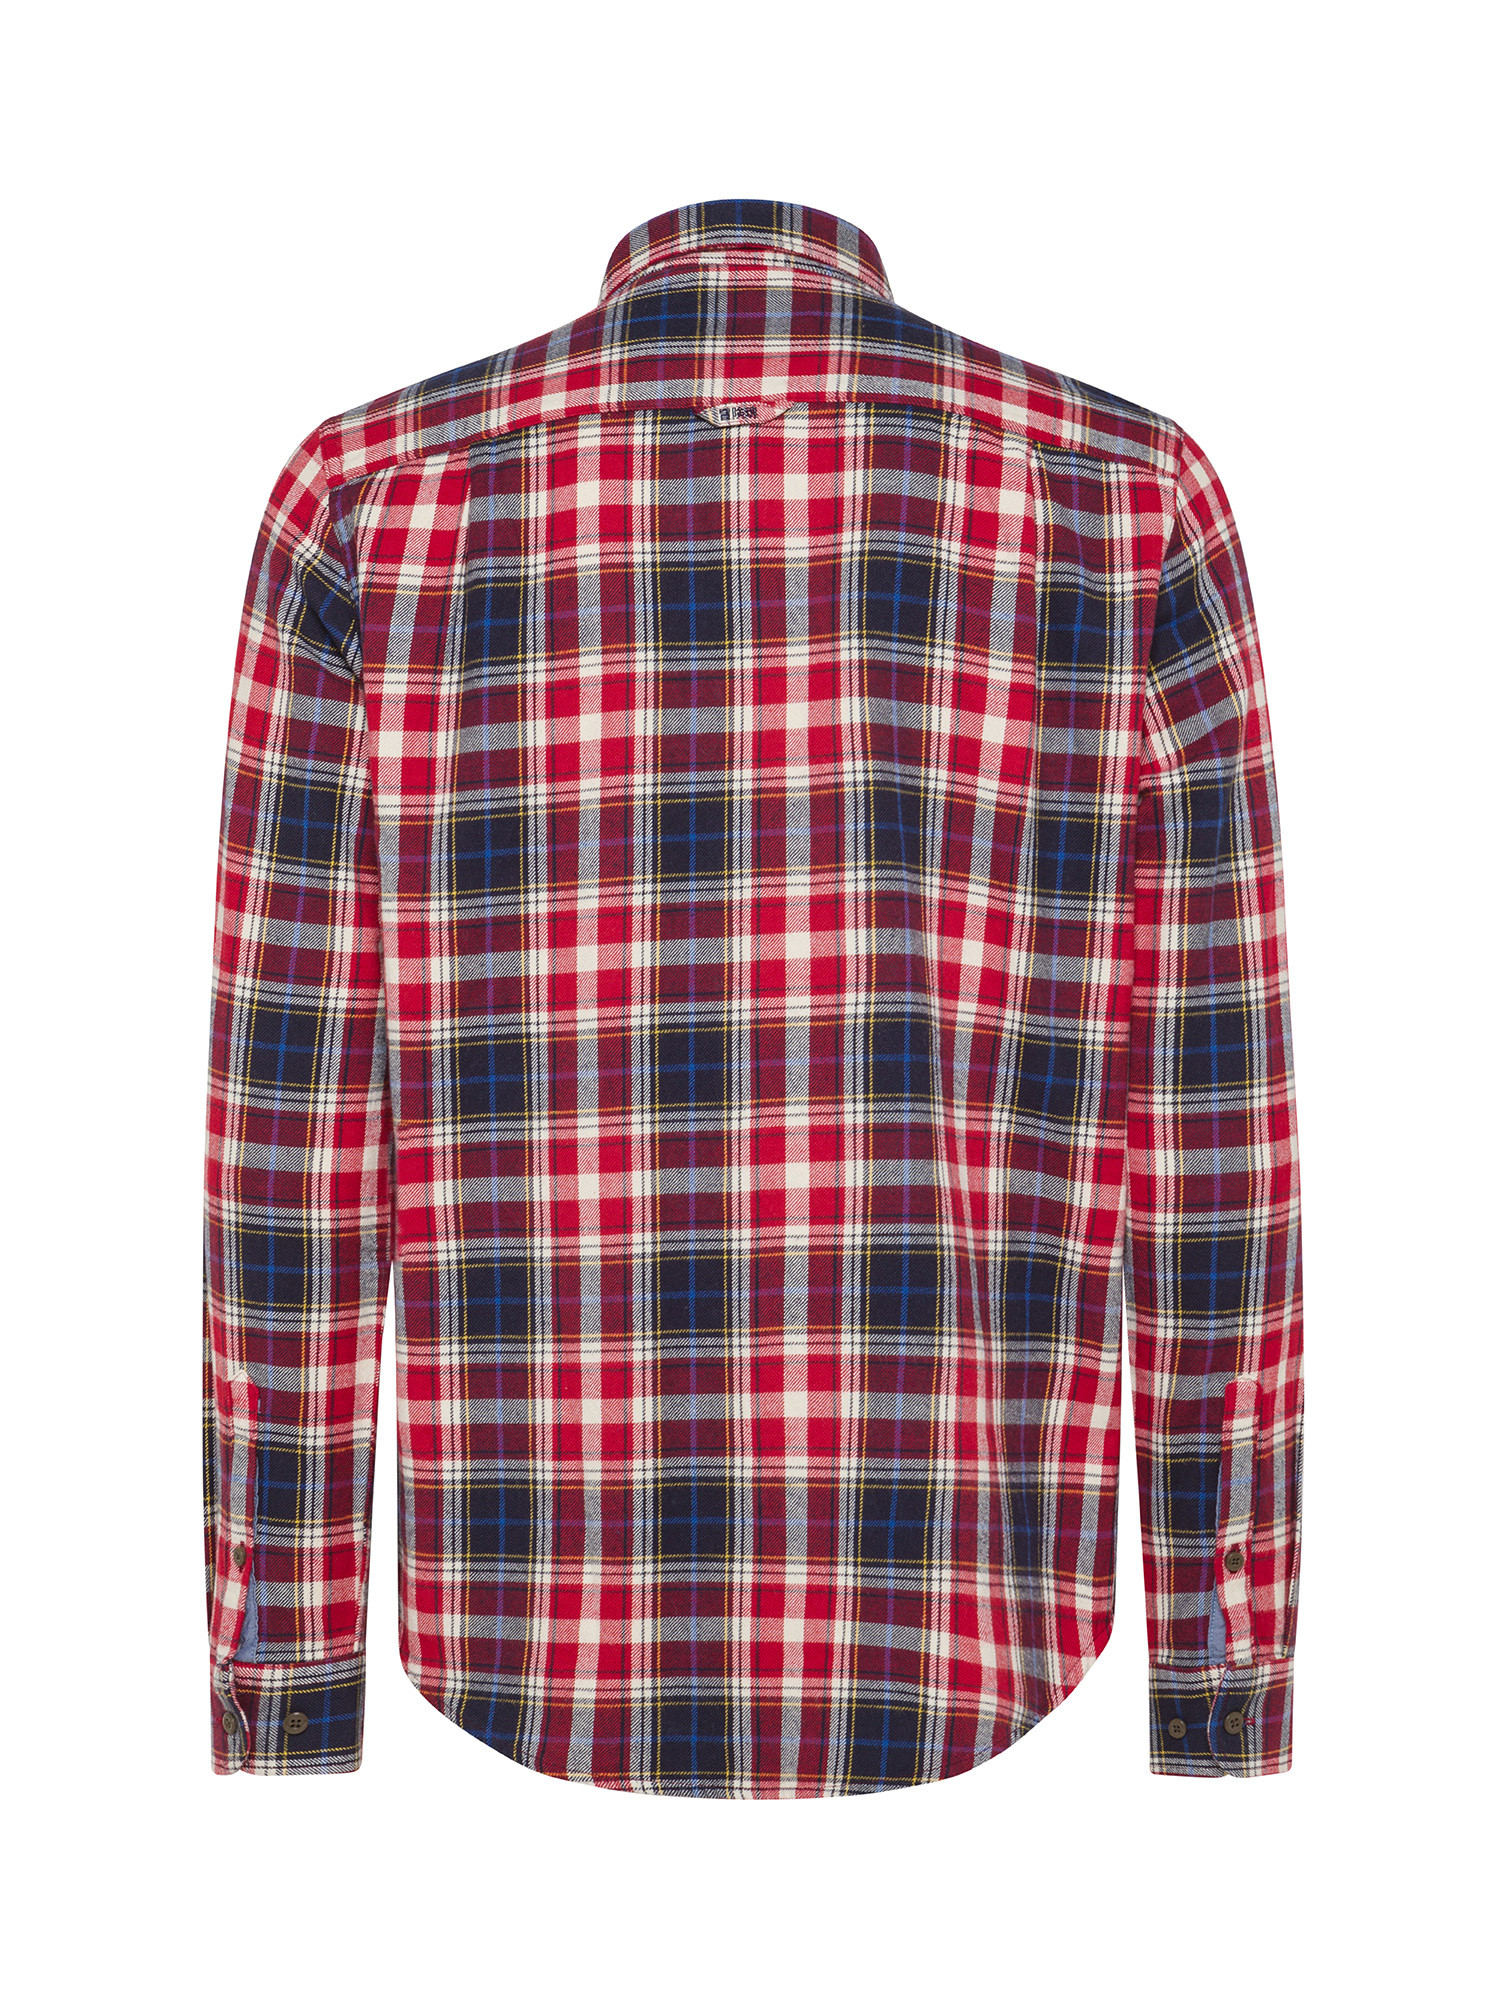 Superdry - Cotton checked shirt, Red, large image number 1